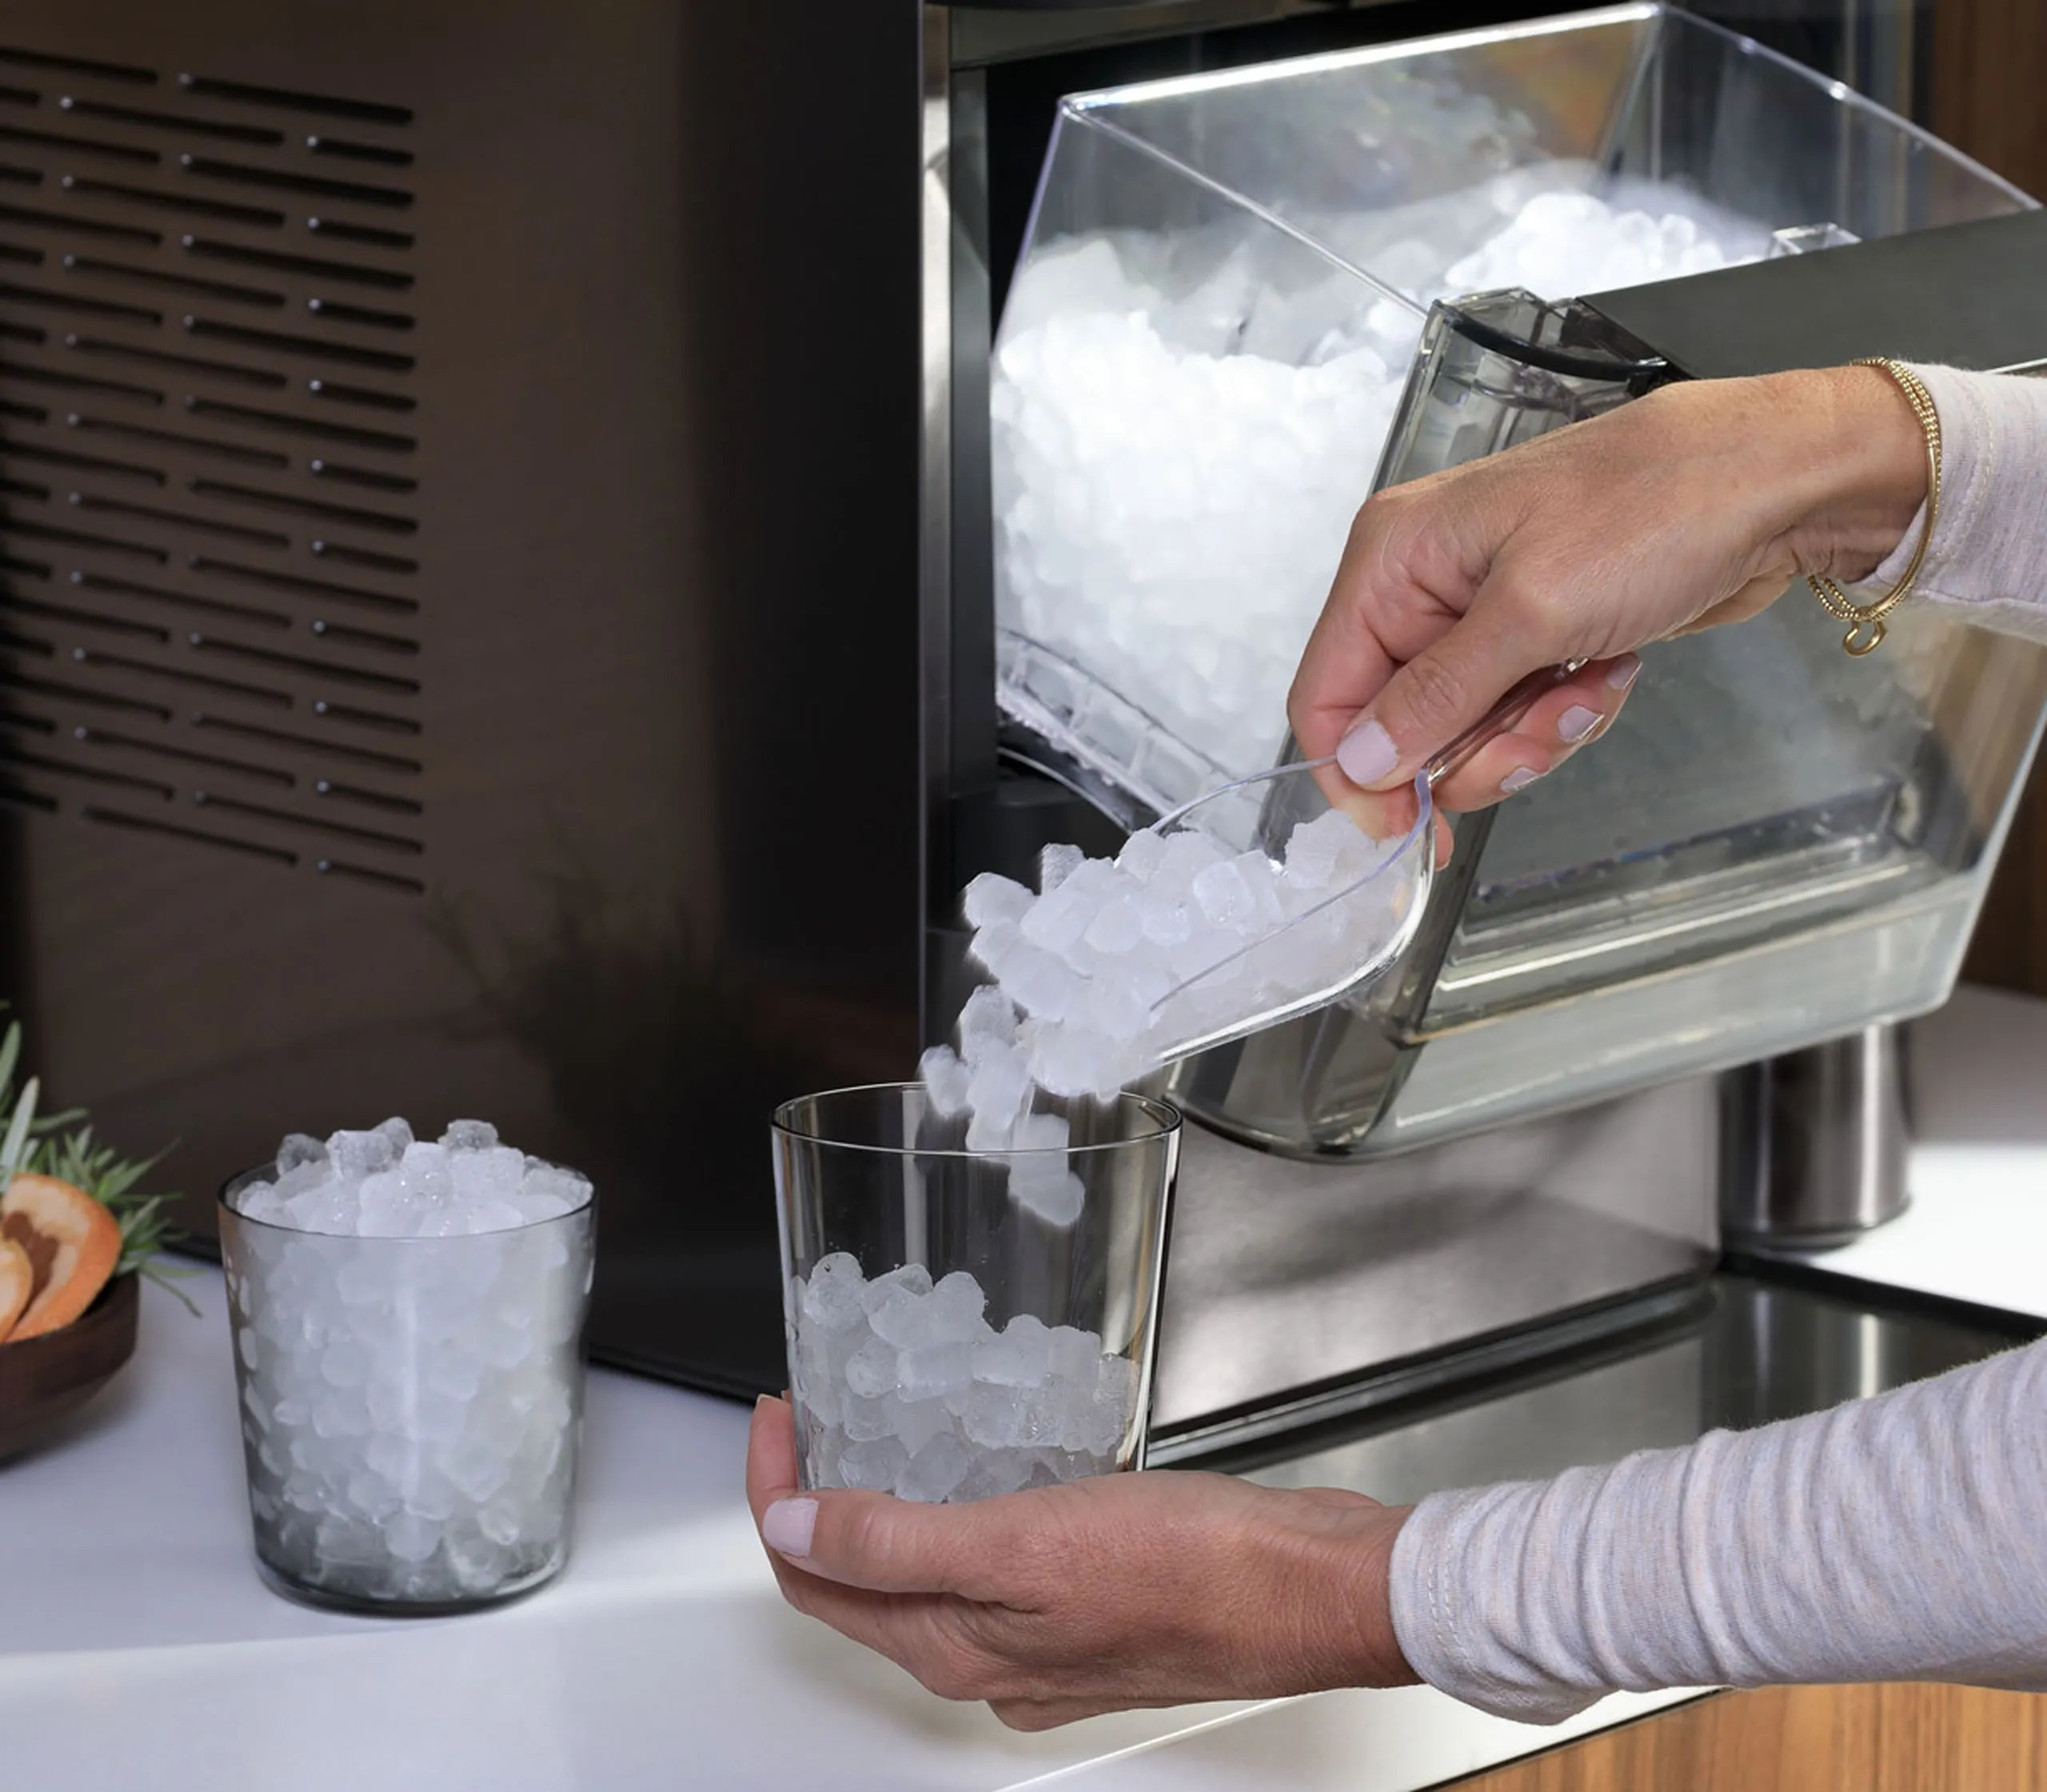 My ice maker stopped working” - Here's what you can do